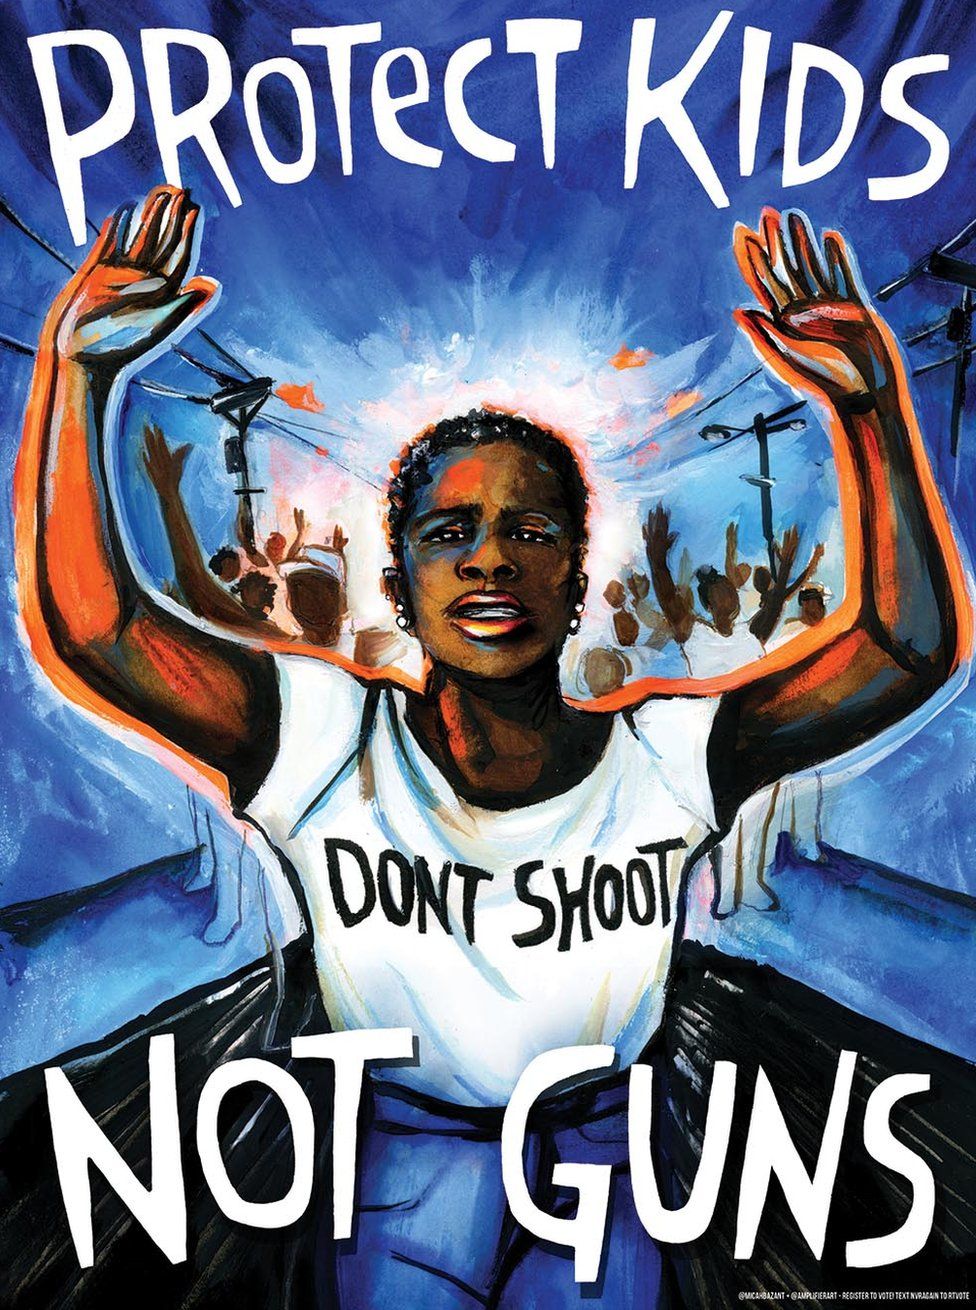 Protest Poster